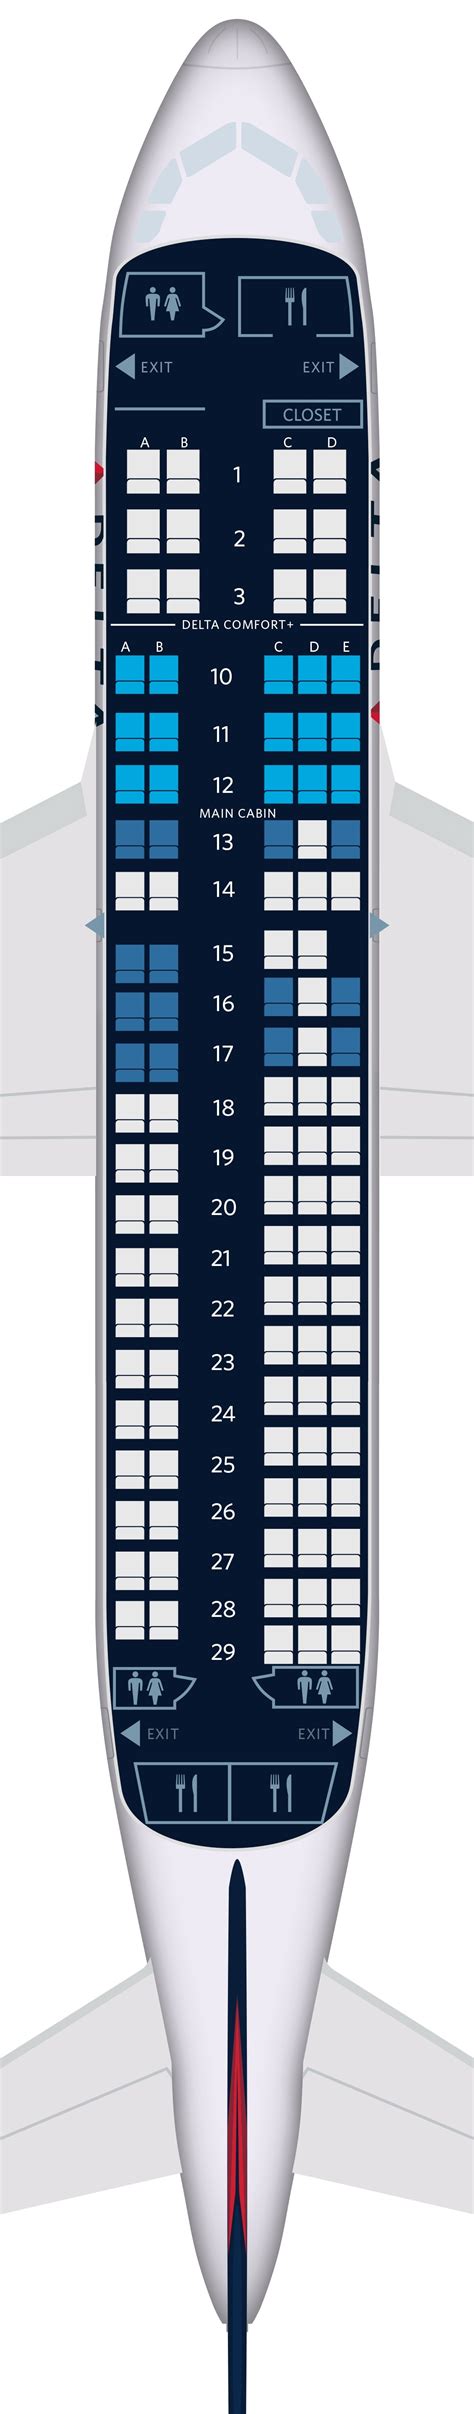 Airbus a220 100 seat map. Technical details and seat plans are available for aircraft types A220-300, A220-100, A321-111, A320-214 and A319-112 from the Airbus family. Go to navigation; Go to main content ... Airbus A220-100. Code: 221. Thanks to innovation in cabin design, passengers can look forward to a significant increase in travel comfort. Further, in terms of ... 